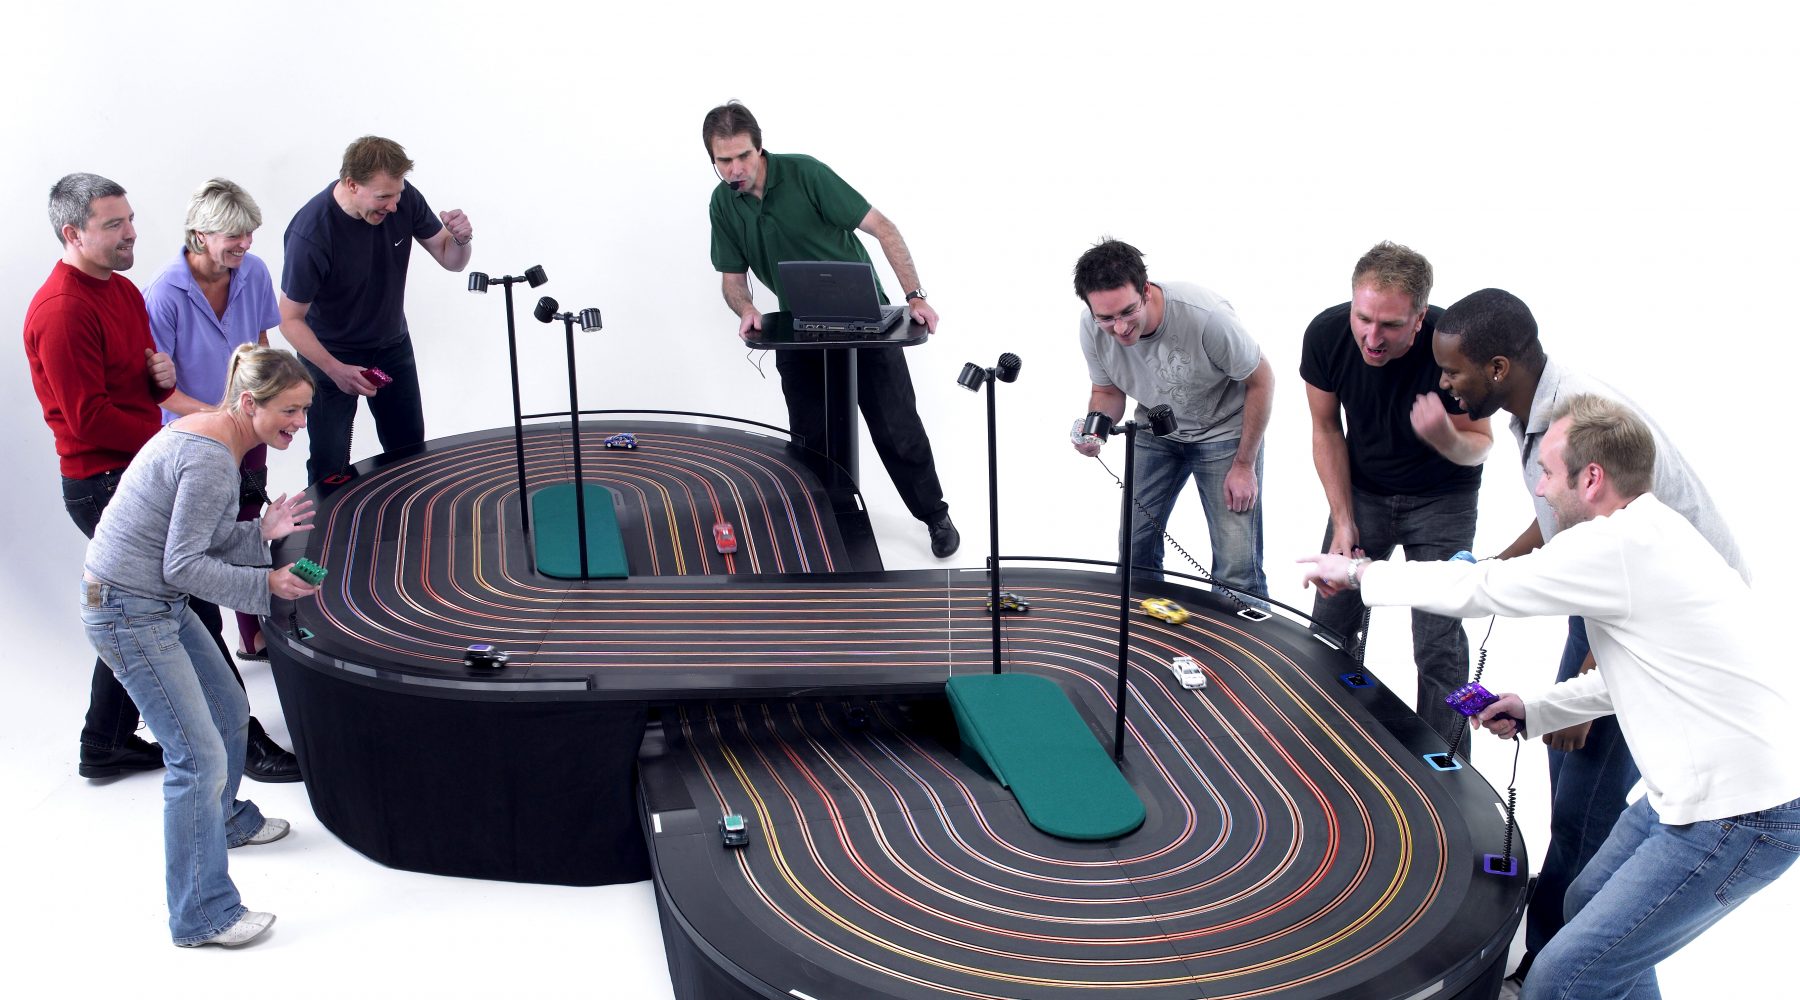 miniracing.com giant 8 lane scalextric track being used in a competition at an event